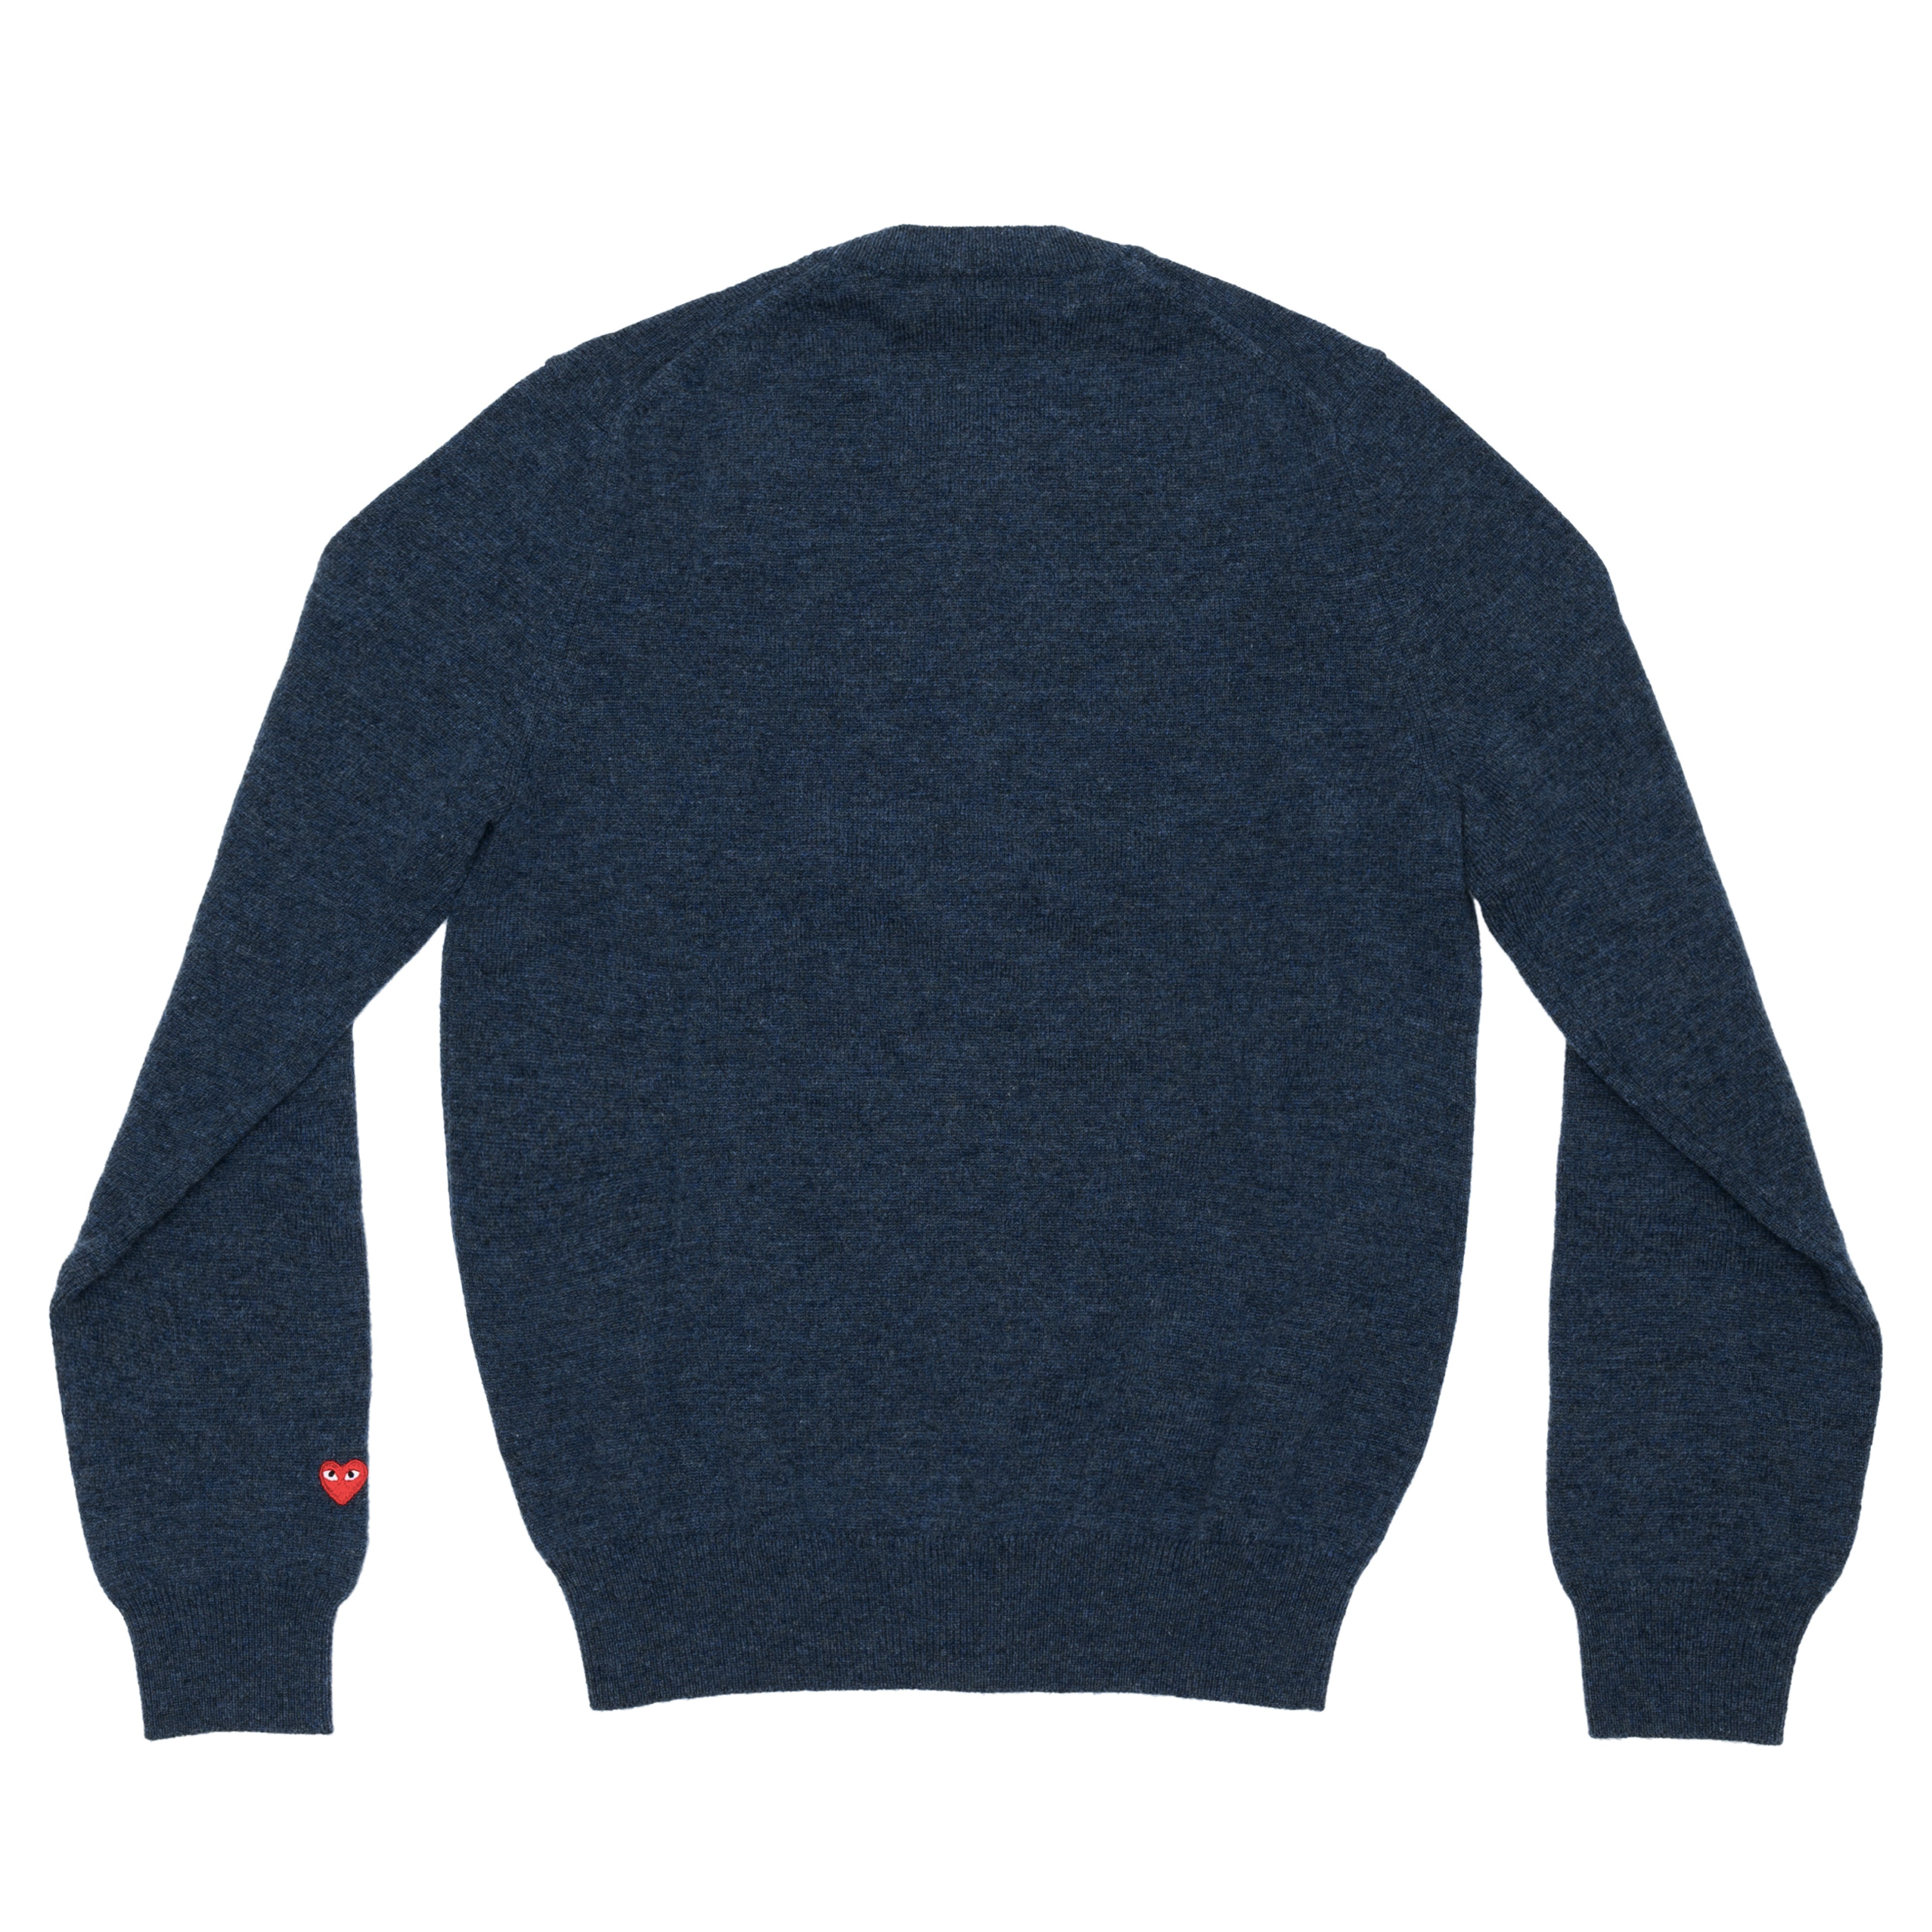 PLAY CDG - Top Dyed Carded Lambswool Women's Cardigan - (Navy)